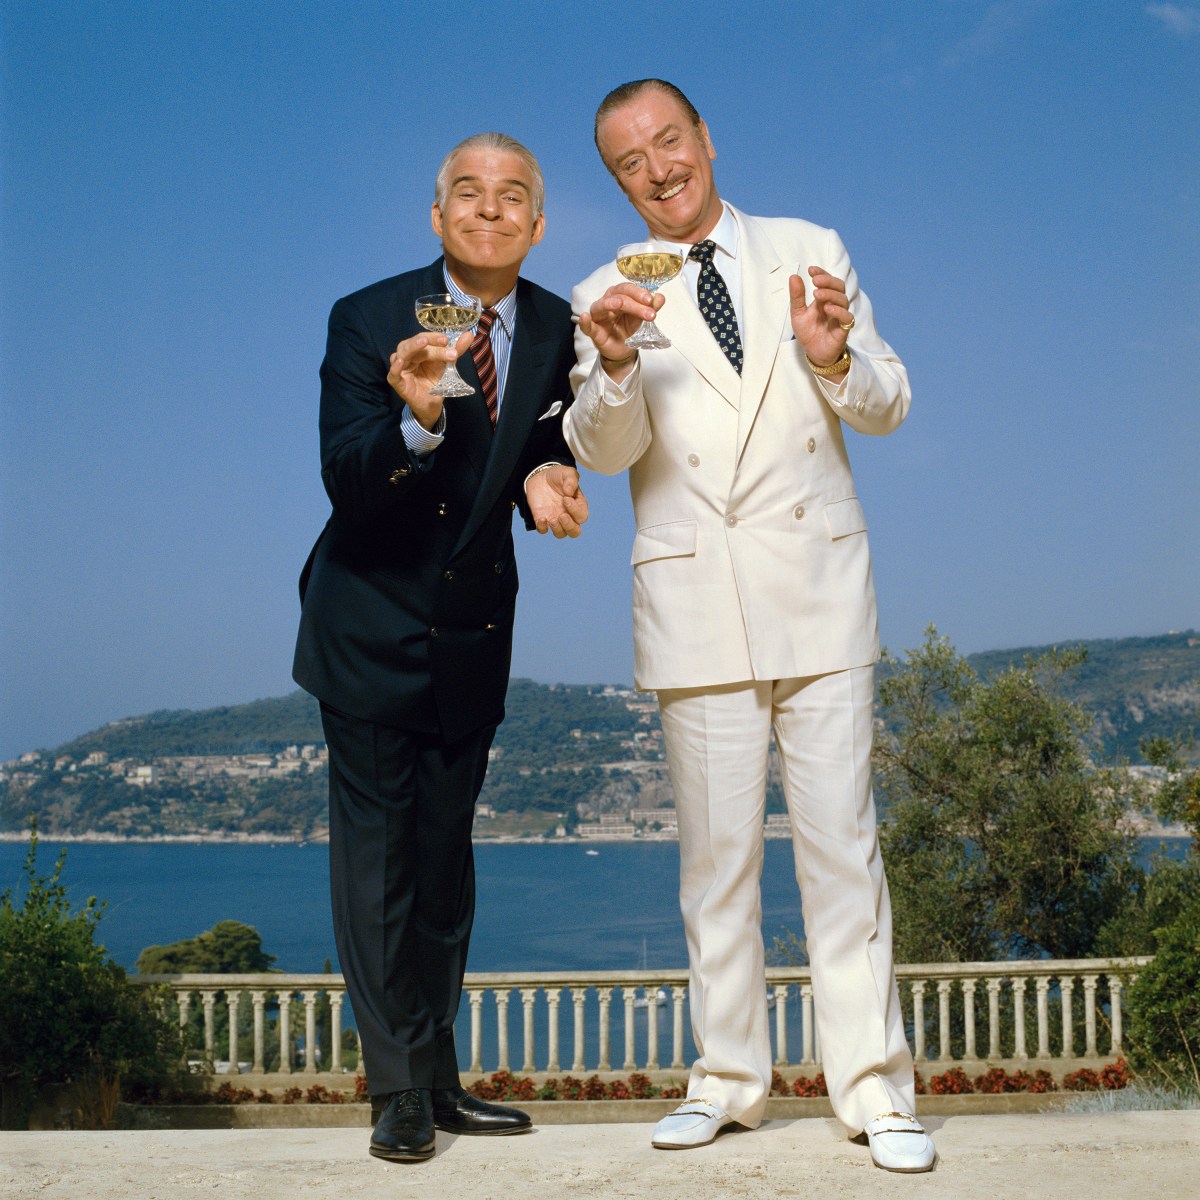 By the late 1980s, Michael Caine was a well-established international movie star, and “Dirty Rotten Scoundrels” was a high point in his Hollywood film career. Here he is with co-star, Steve Martin in 1988. <br><br>By Terry O'Neill, courtesy of ACC Art Books